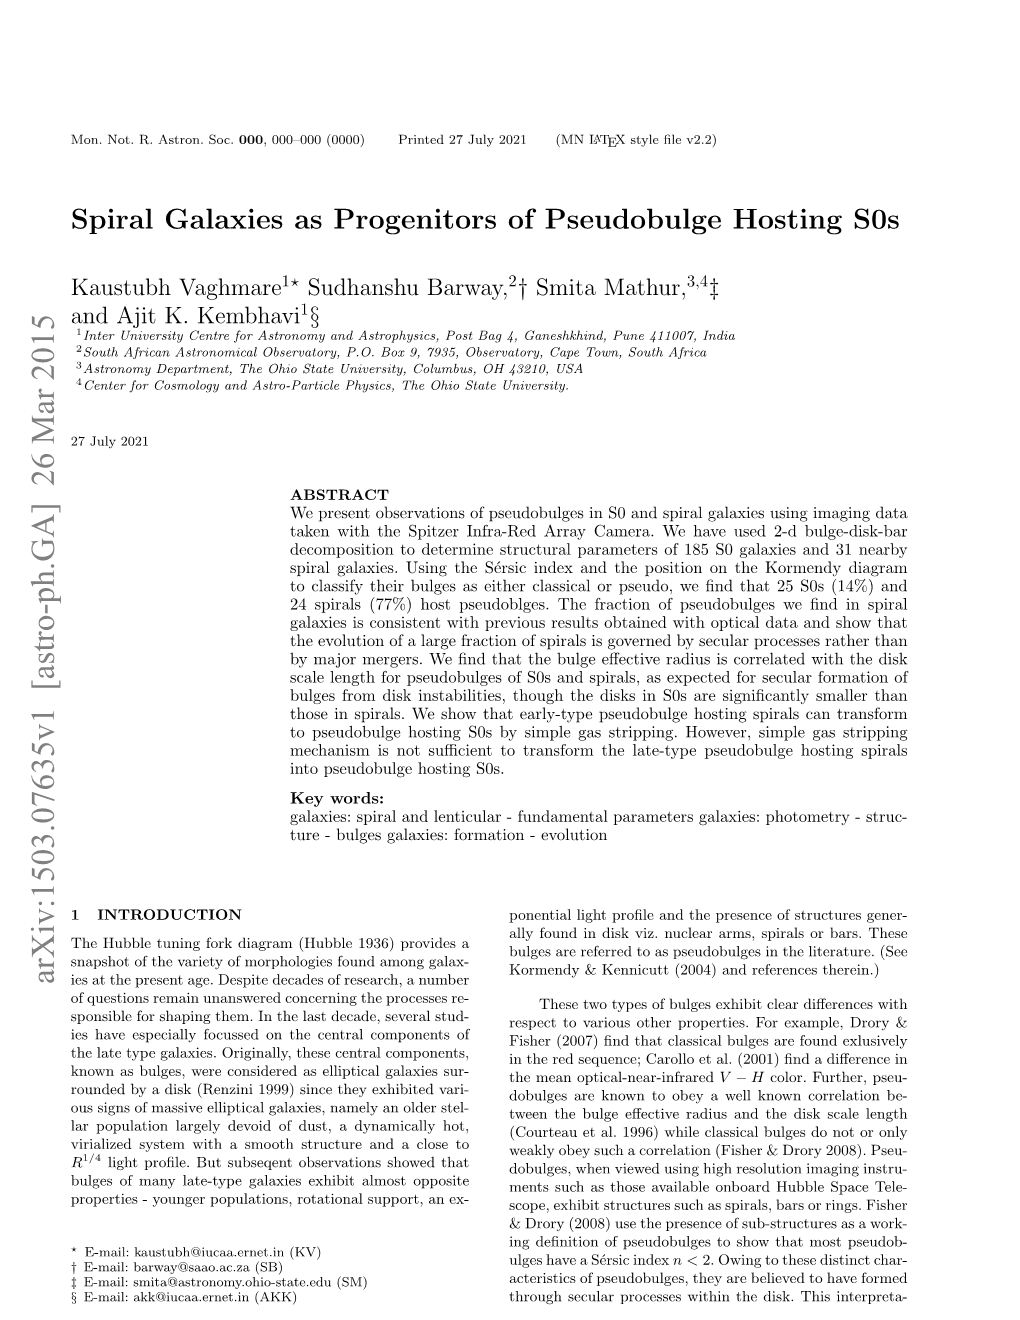 Spiral Galaxies As Progenitors of Pseudobulge Hosting S0s